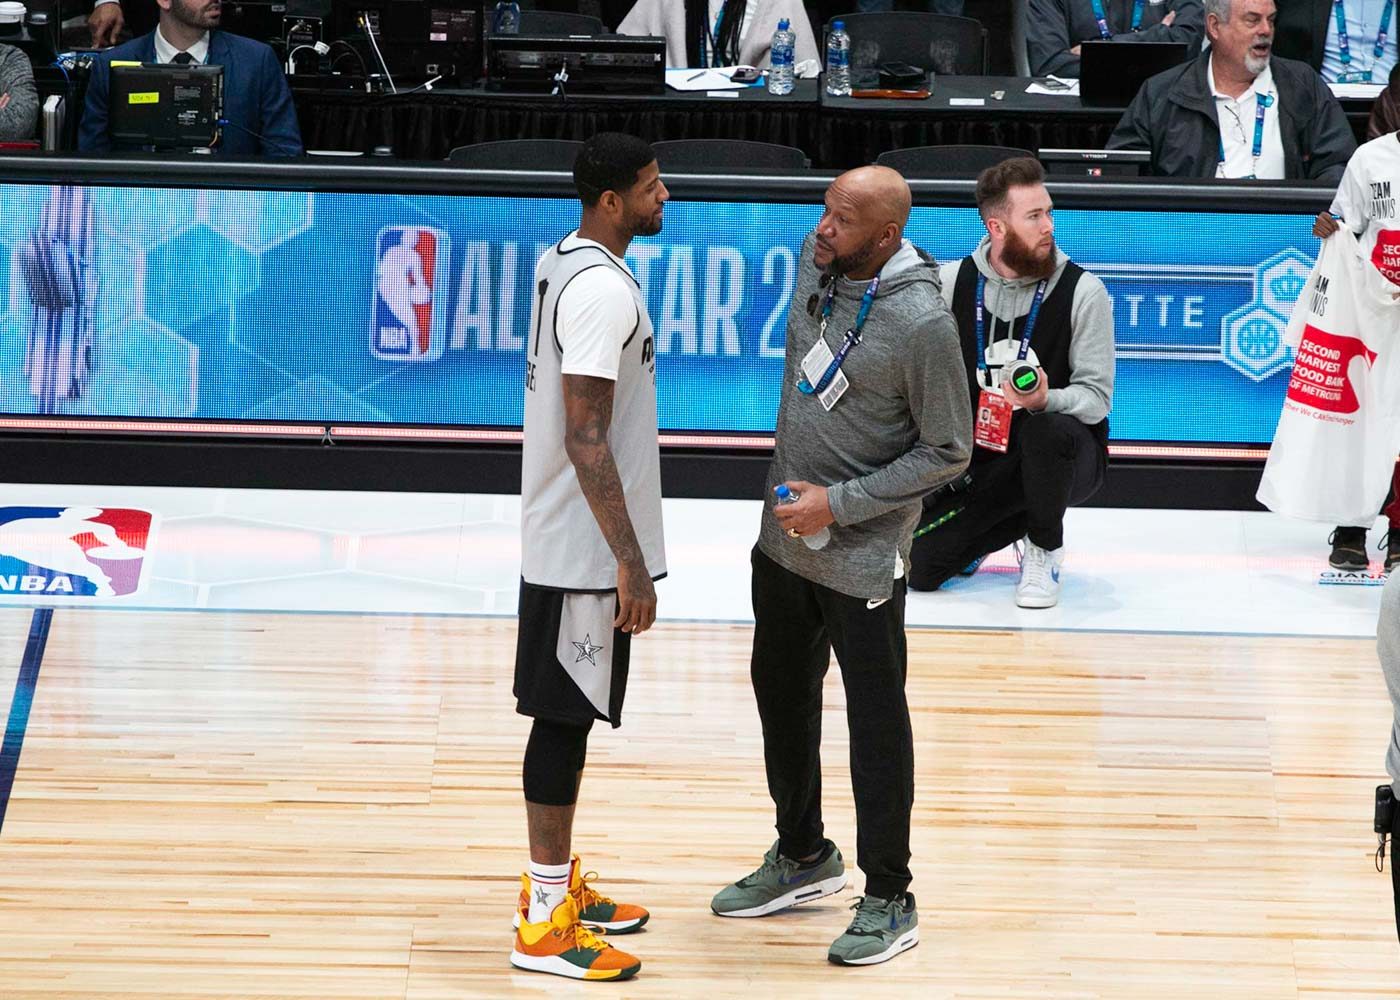 CATCH UP. The All-Star break allows players to catch up with some NBA legends, just like OKC Thunder forward Paul George and Ron Harper of the famed Chicago Bulls dynasty.
 